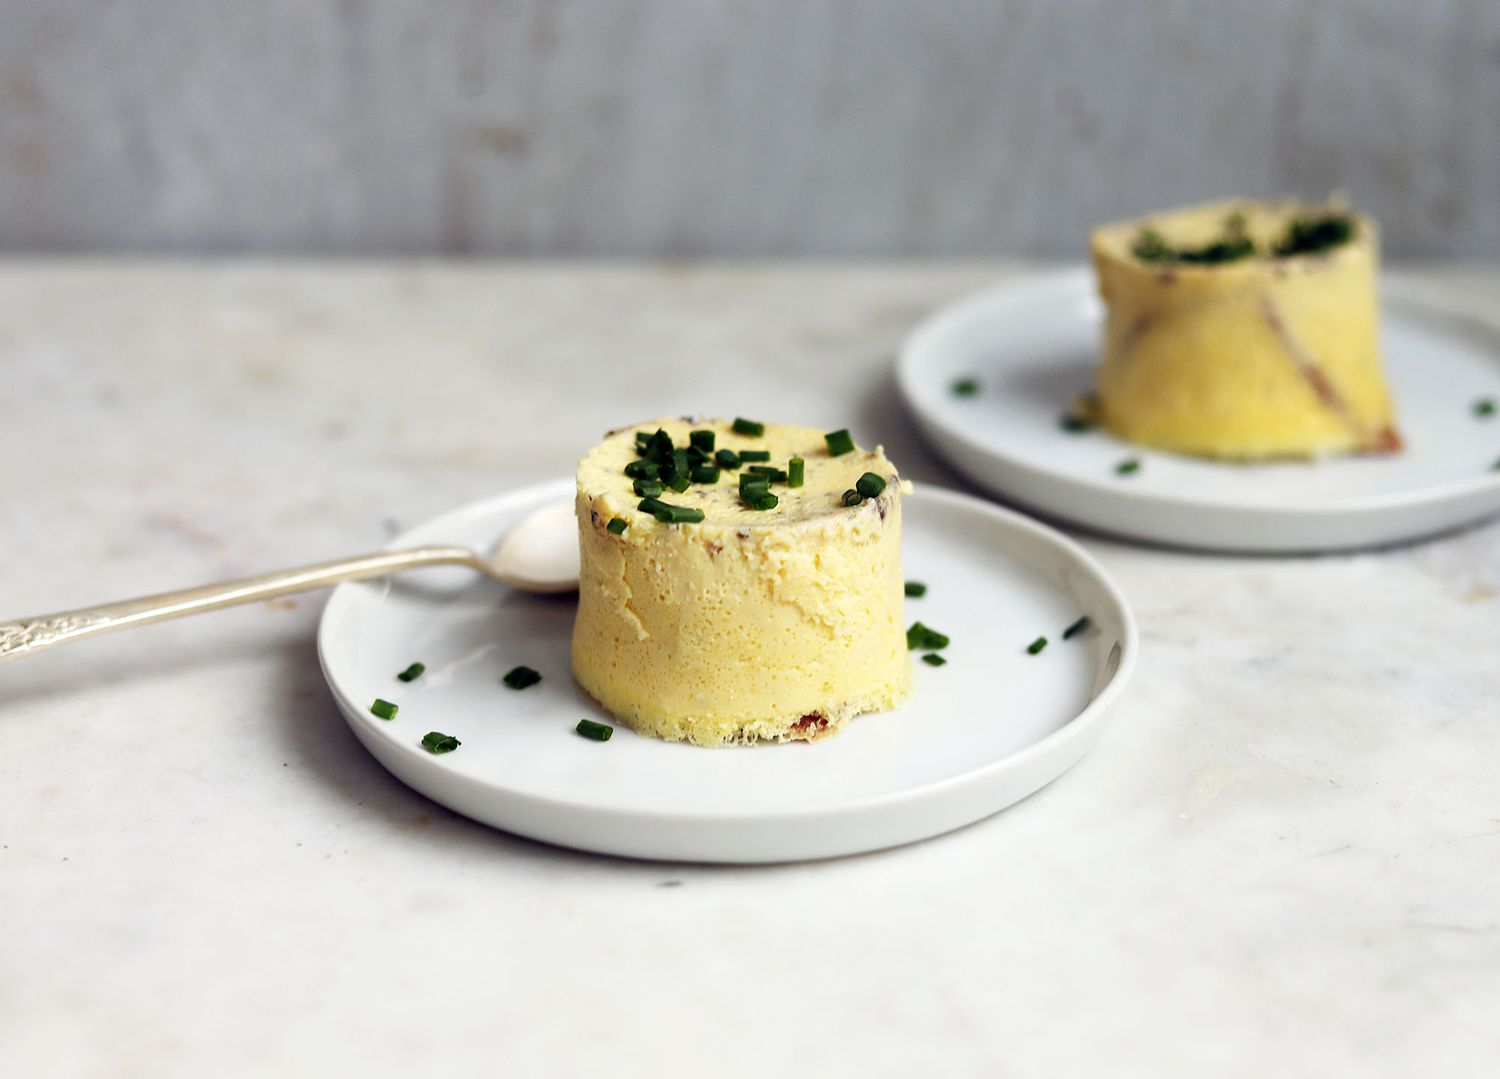 sous vide egg bites on plates with chives